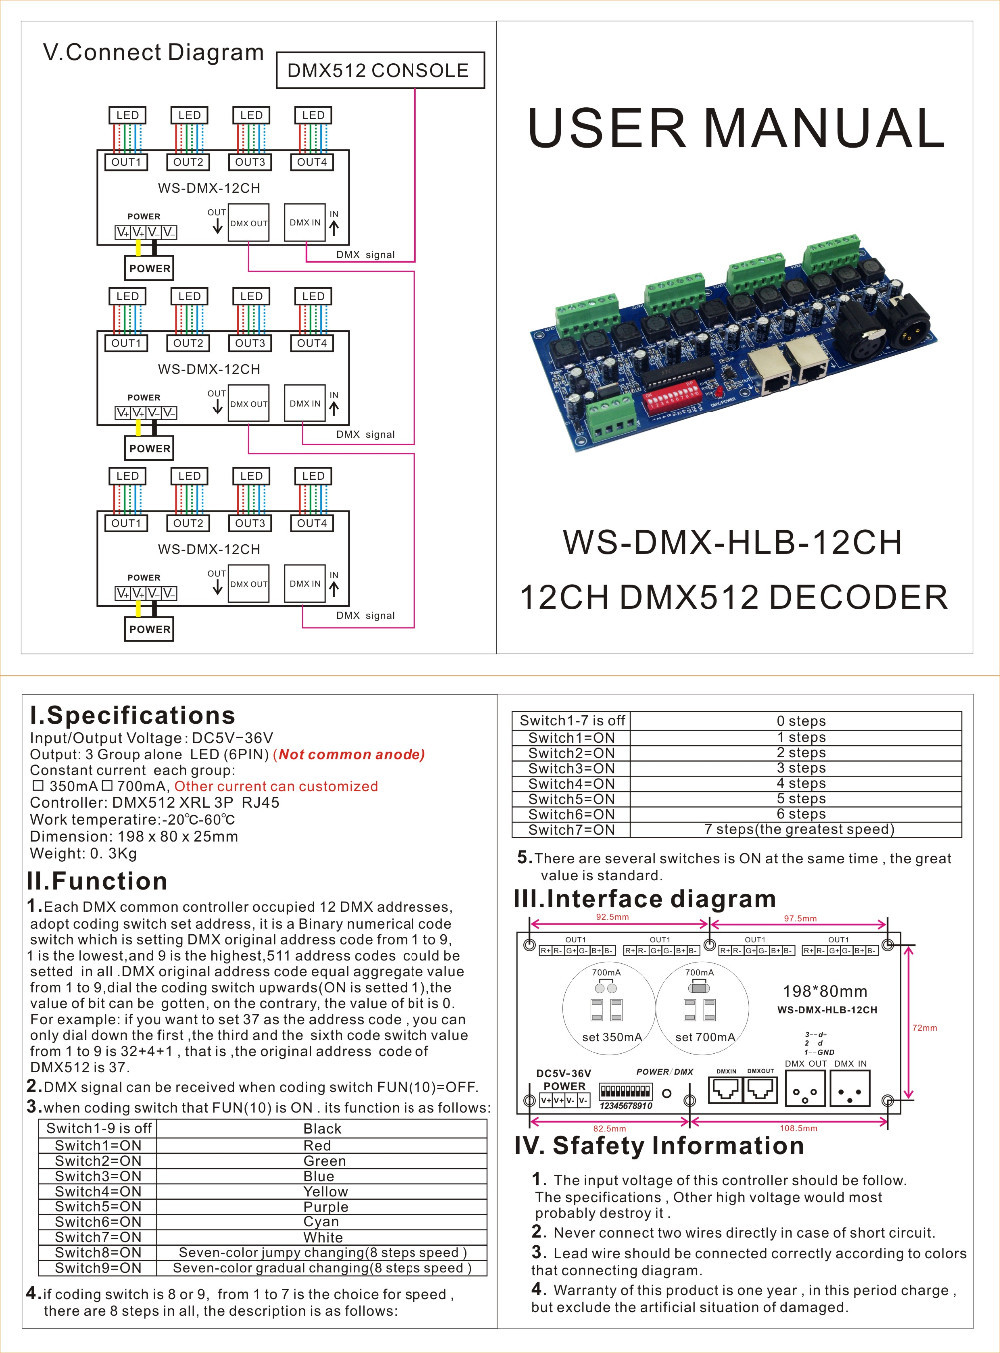 DMX_Controllers_and_Decoders_WS_DMX_HLB_12CH_350MA_2